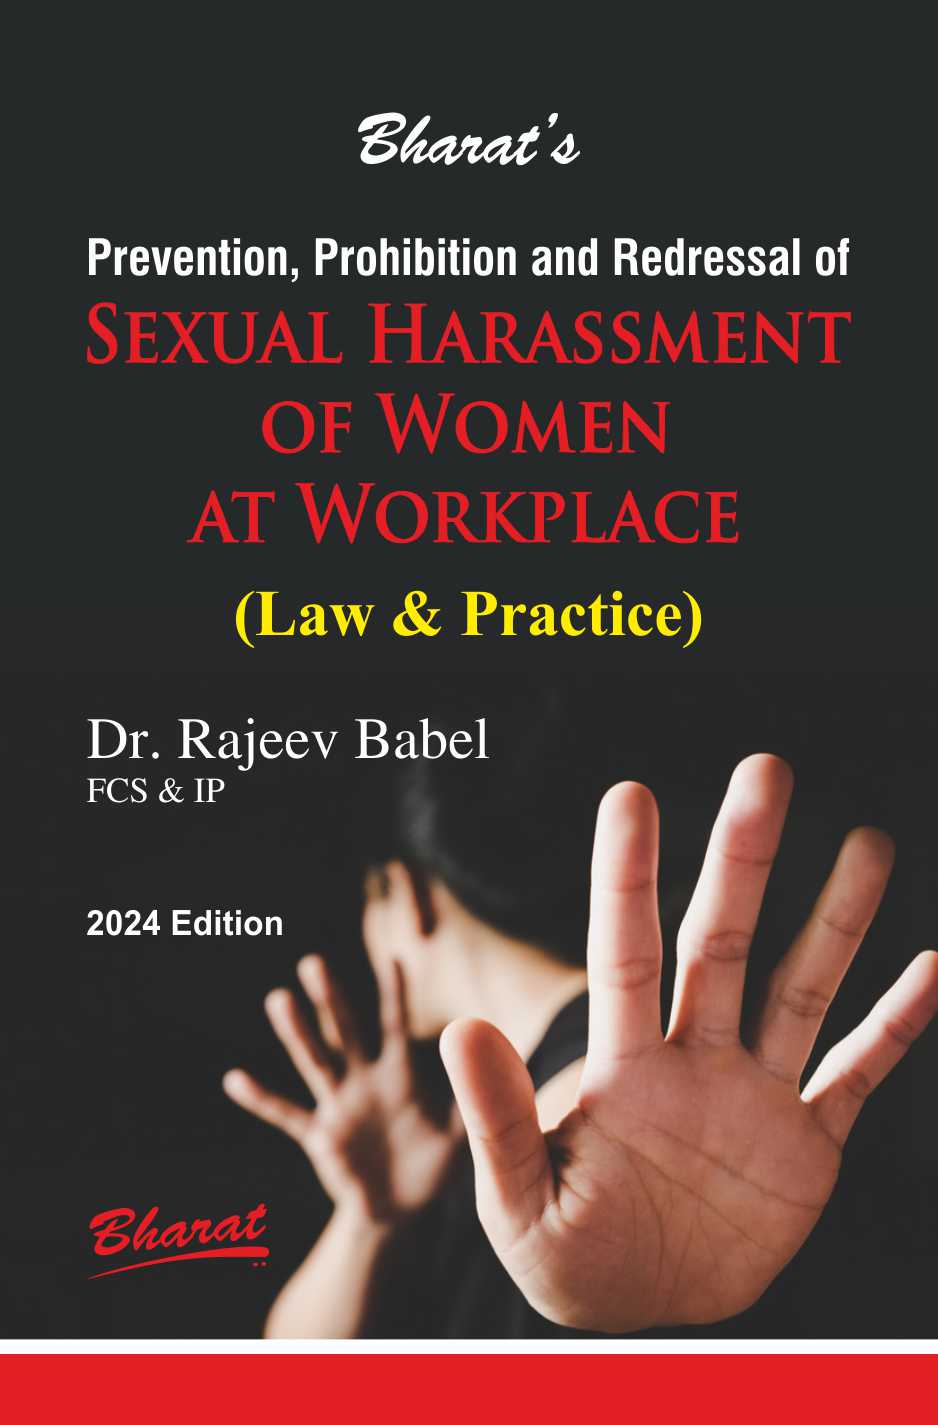 Prevention, Prohibition and Redressal of  Sexual Harassment of Women at Workplace (Law & Practice)